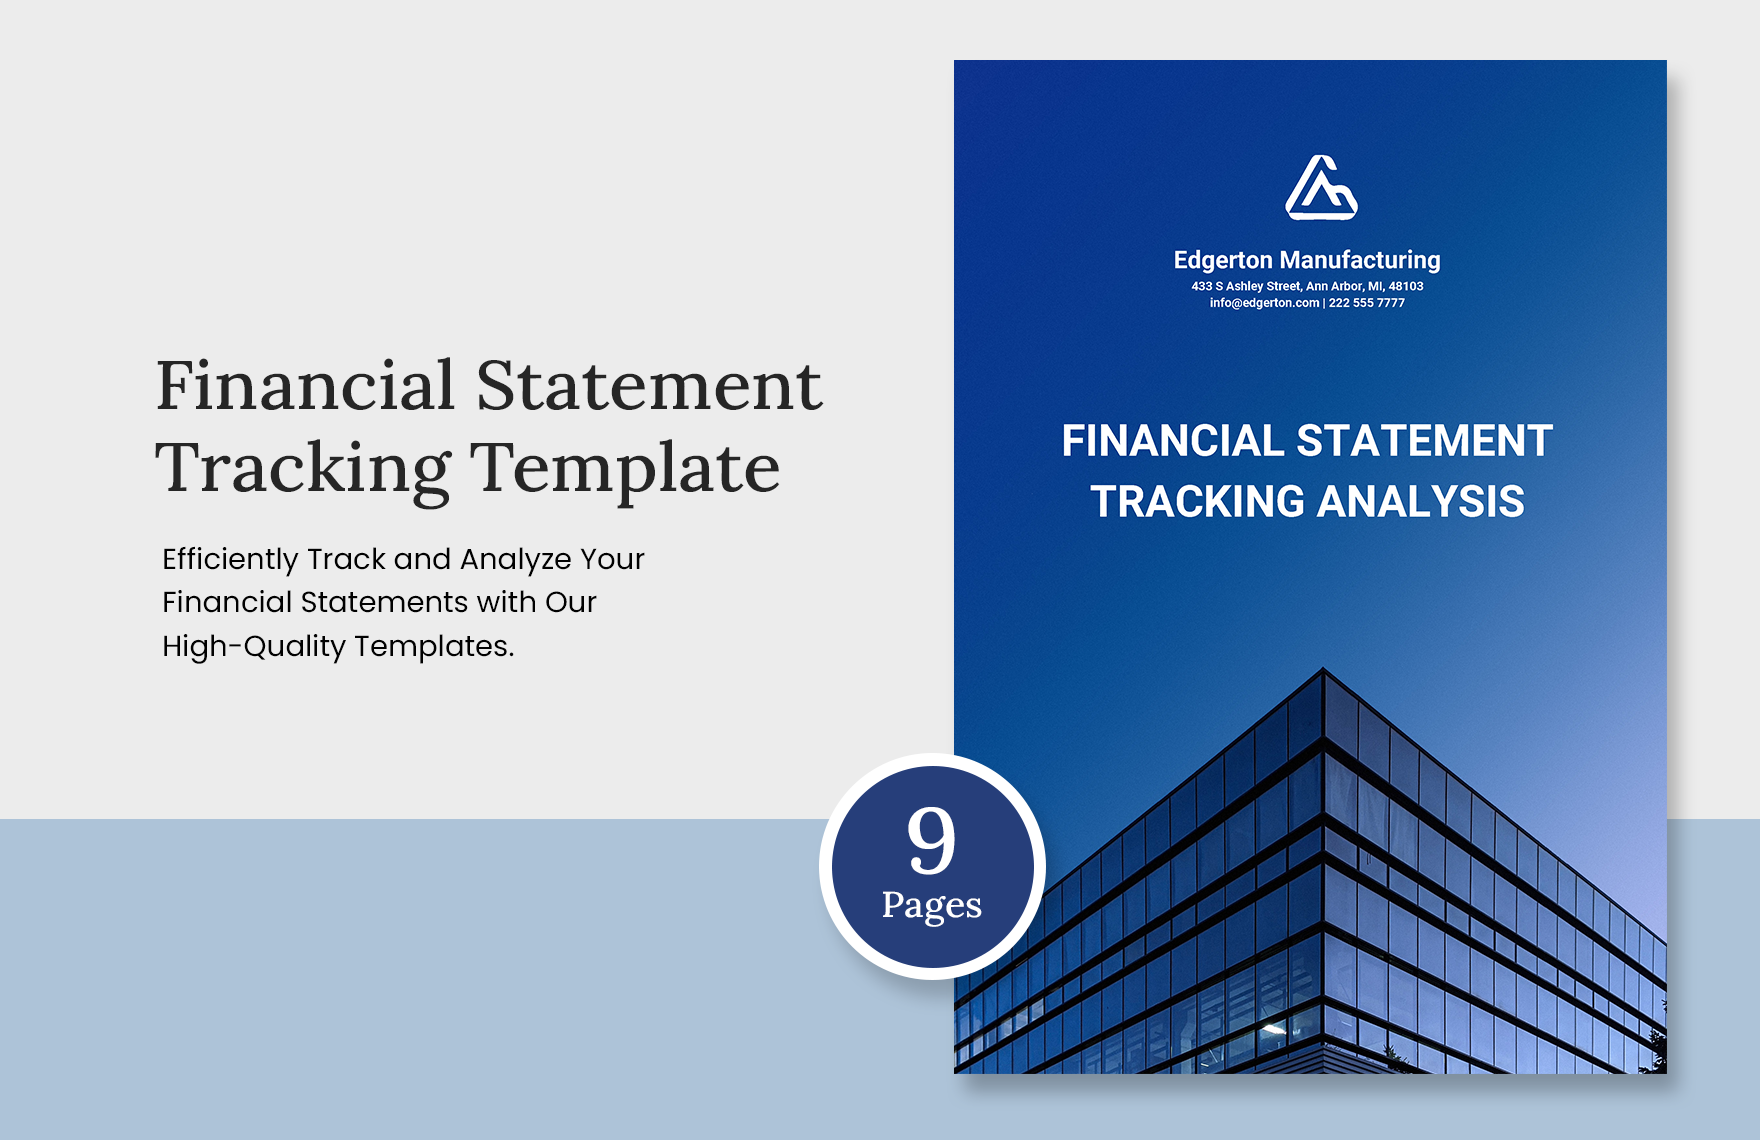 Financial Statement Tracking Template